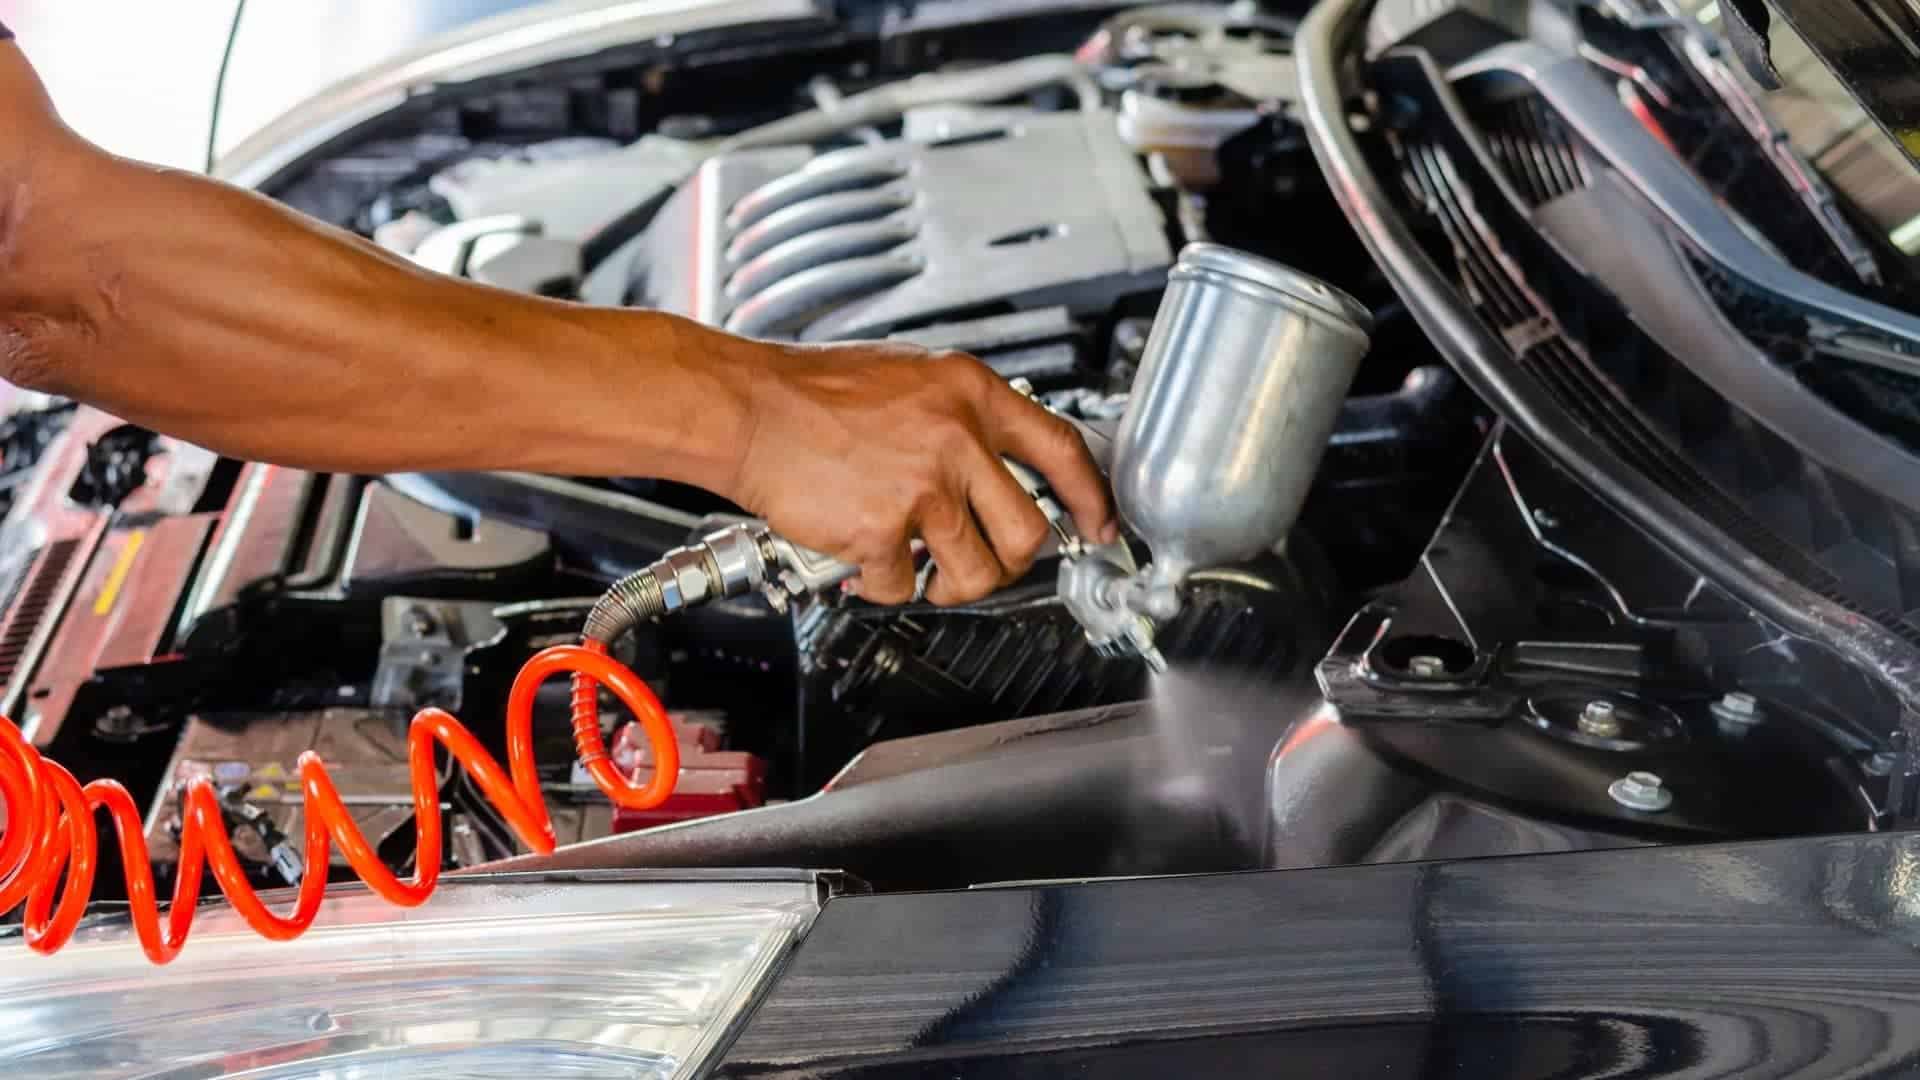 How To Paint Engine Bay Without Removing Engine